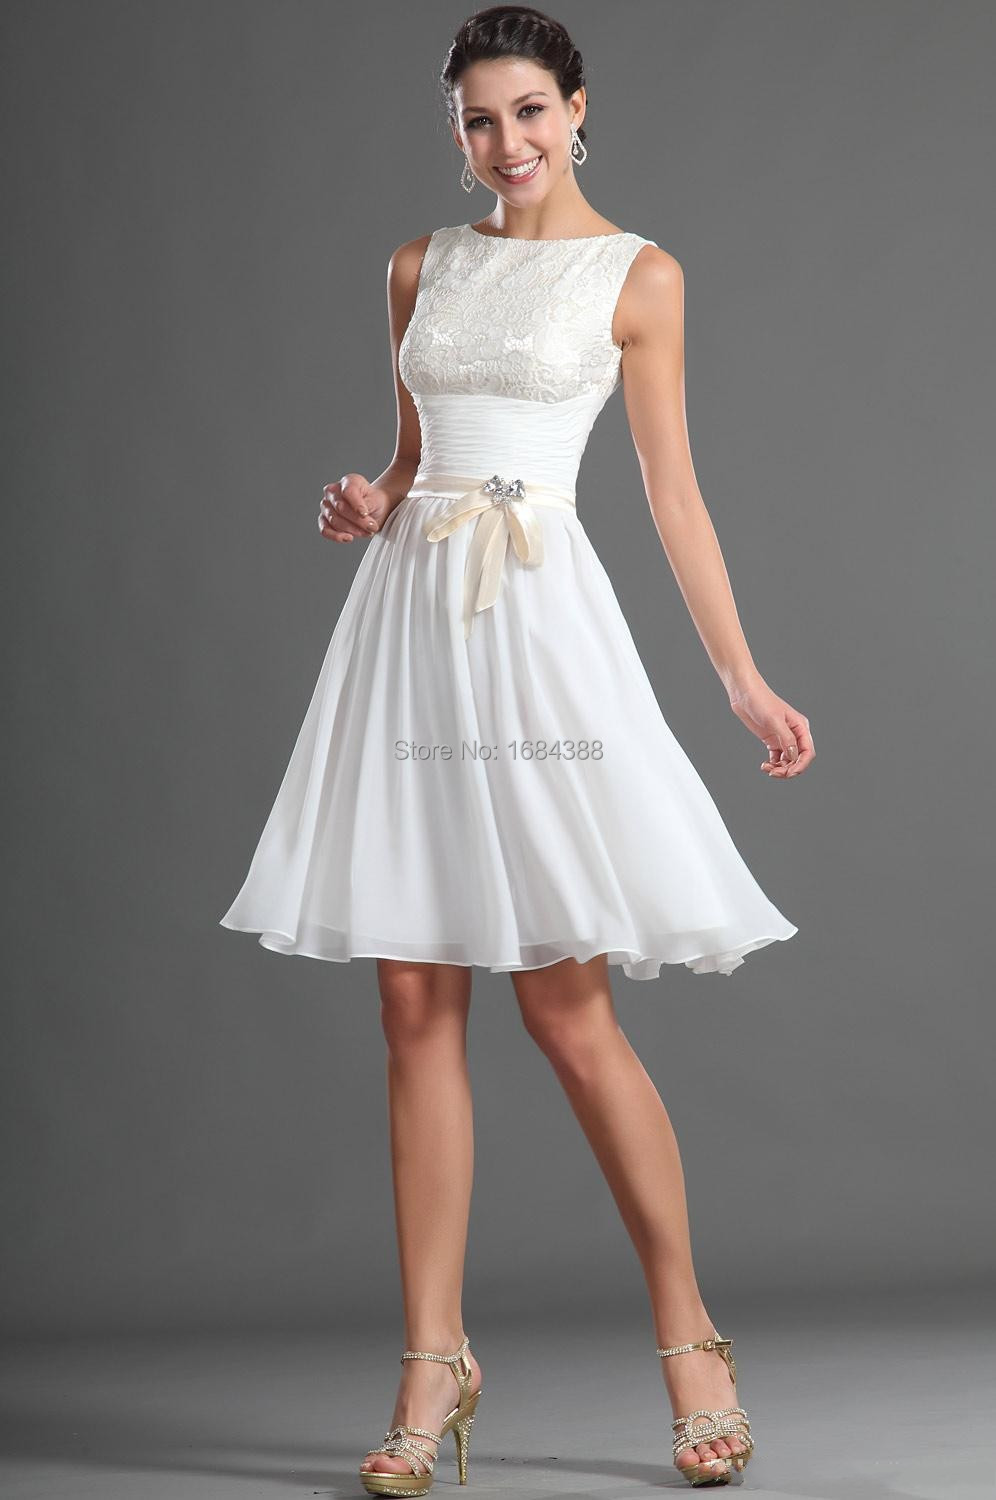 2015 Elegant Sleeveless Cocktail Lace Crystal Sash Knee Length A Line Chiffon Homecoming Dress Cocktail Party